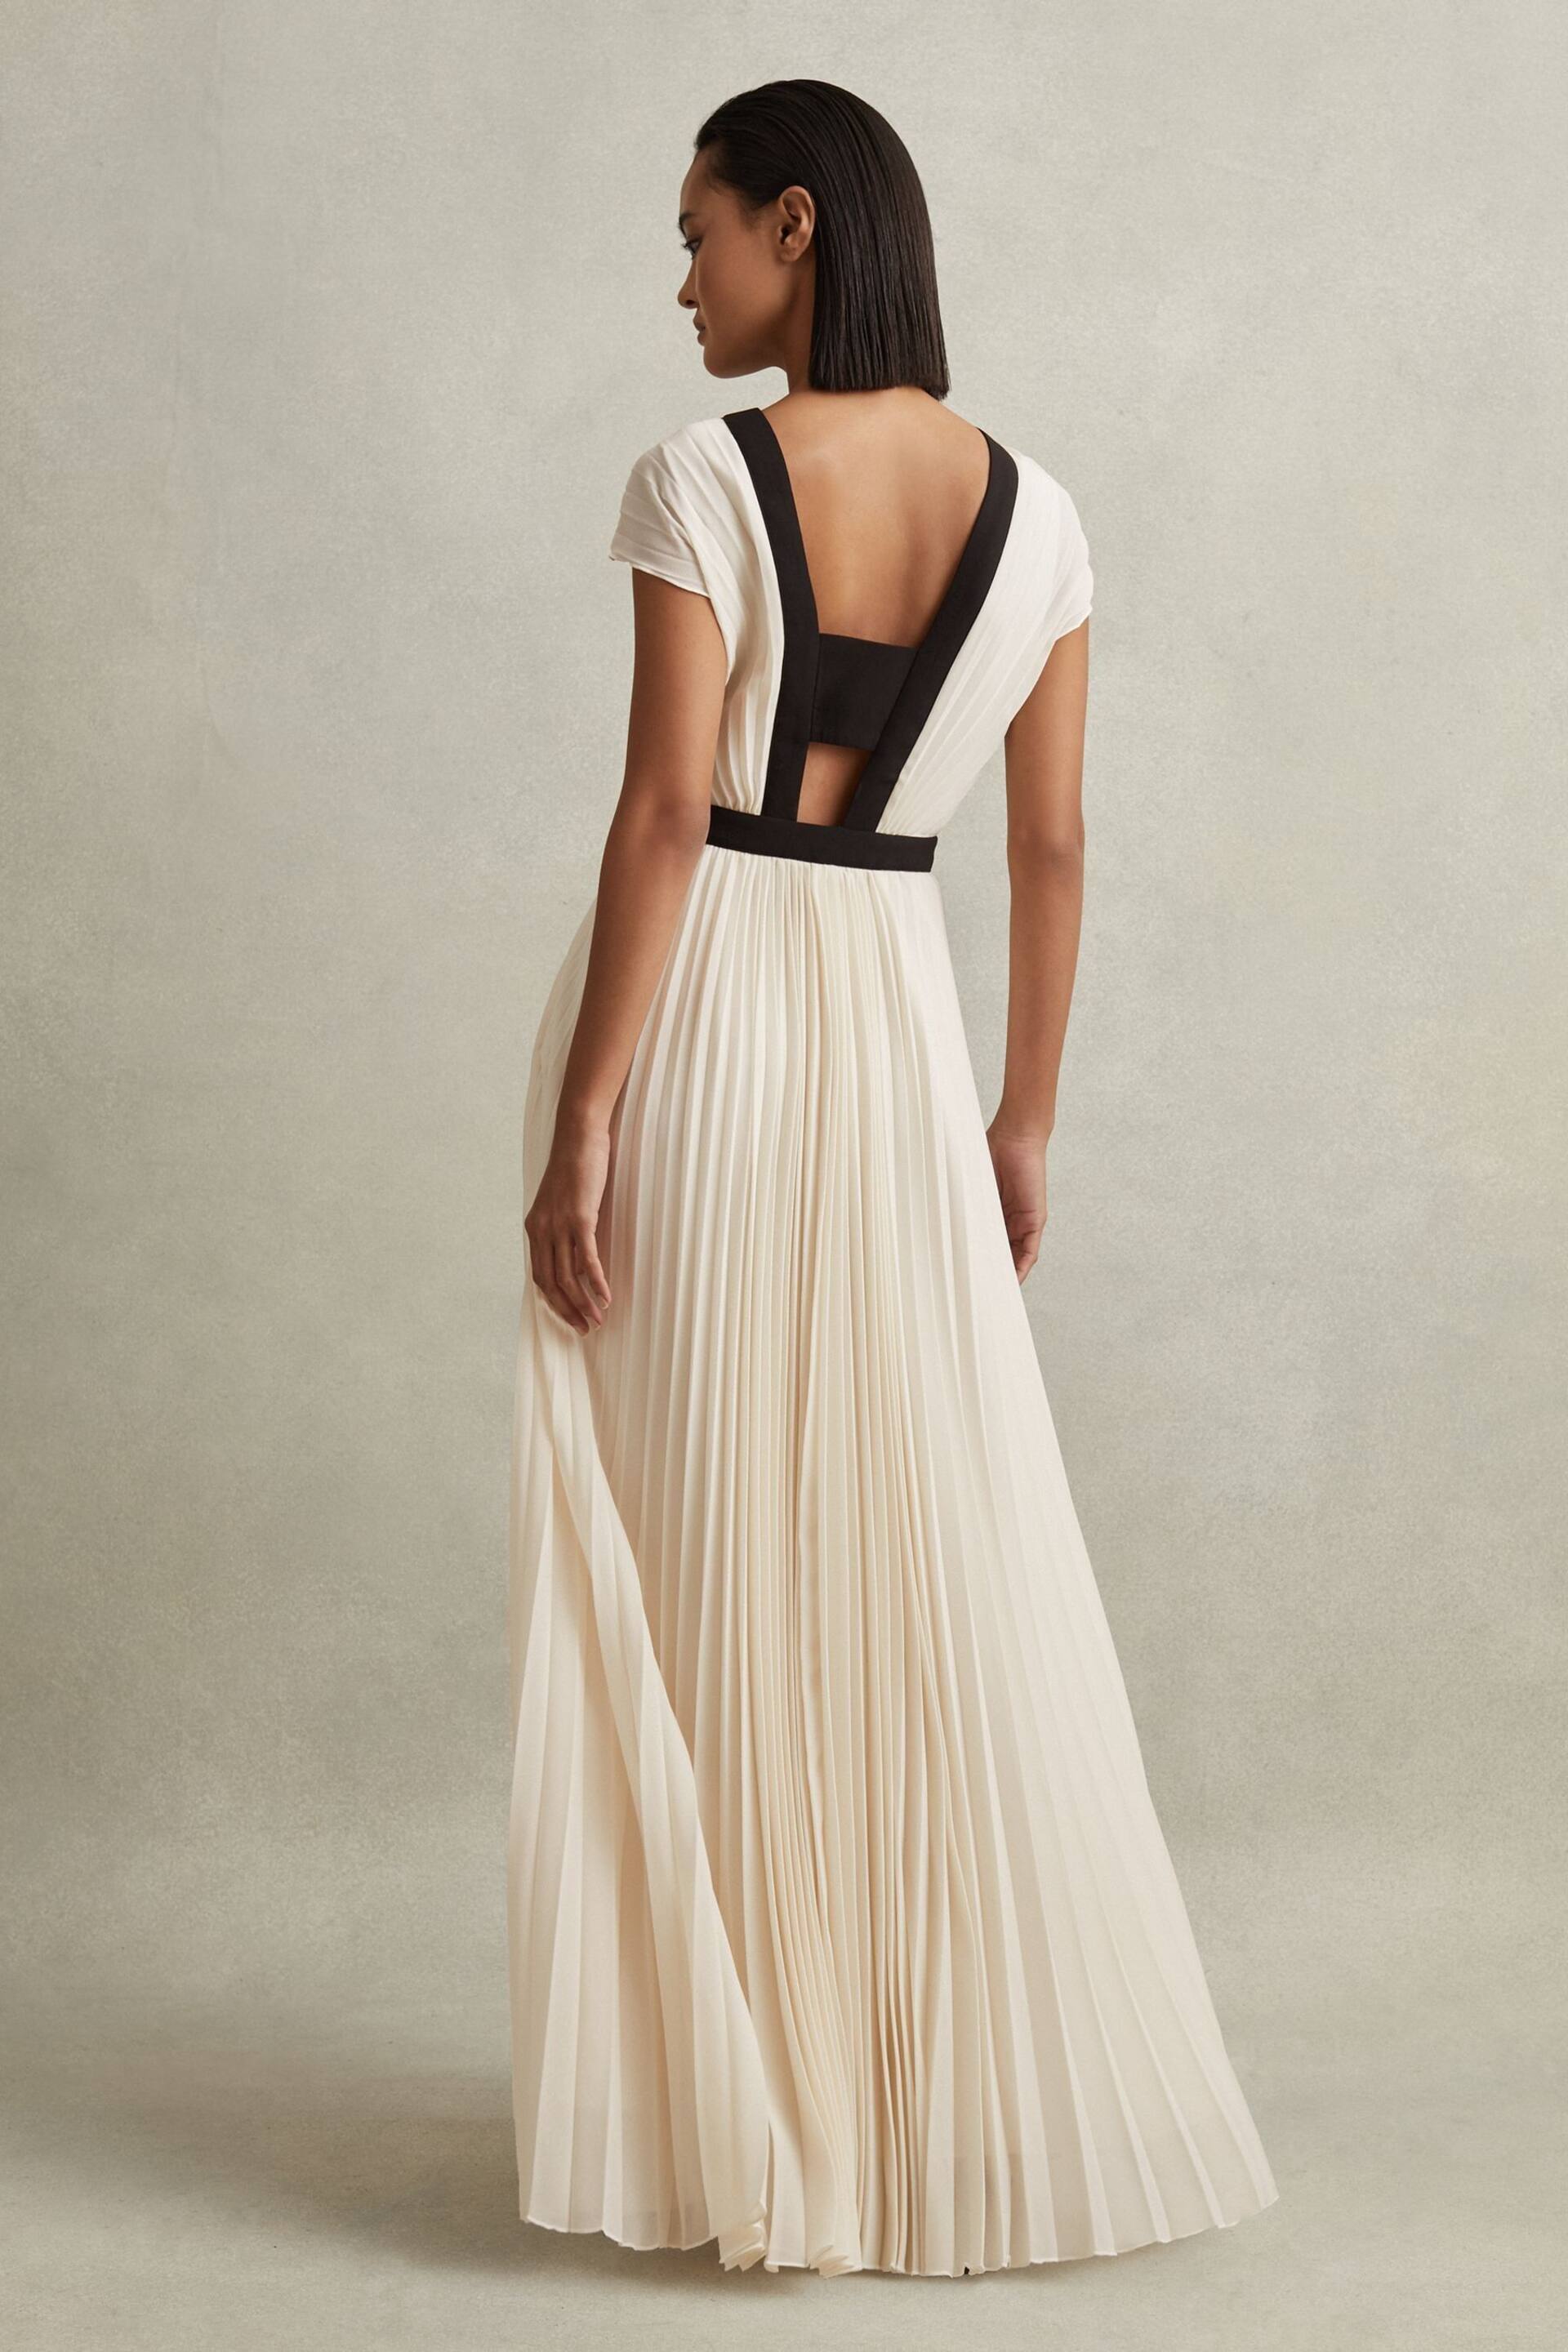 Reiss White Harley Pleated Maxi Dress - Image 4 of 6